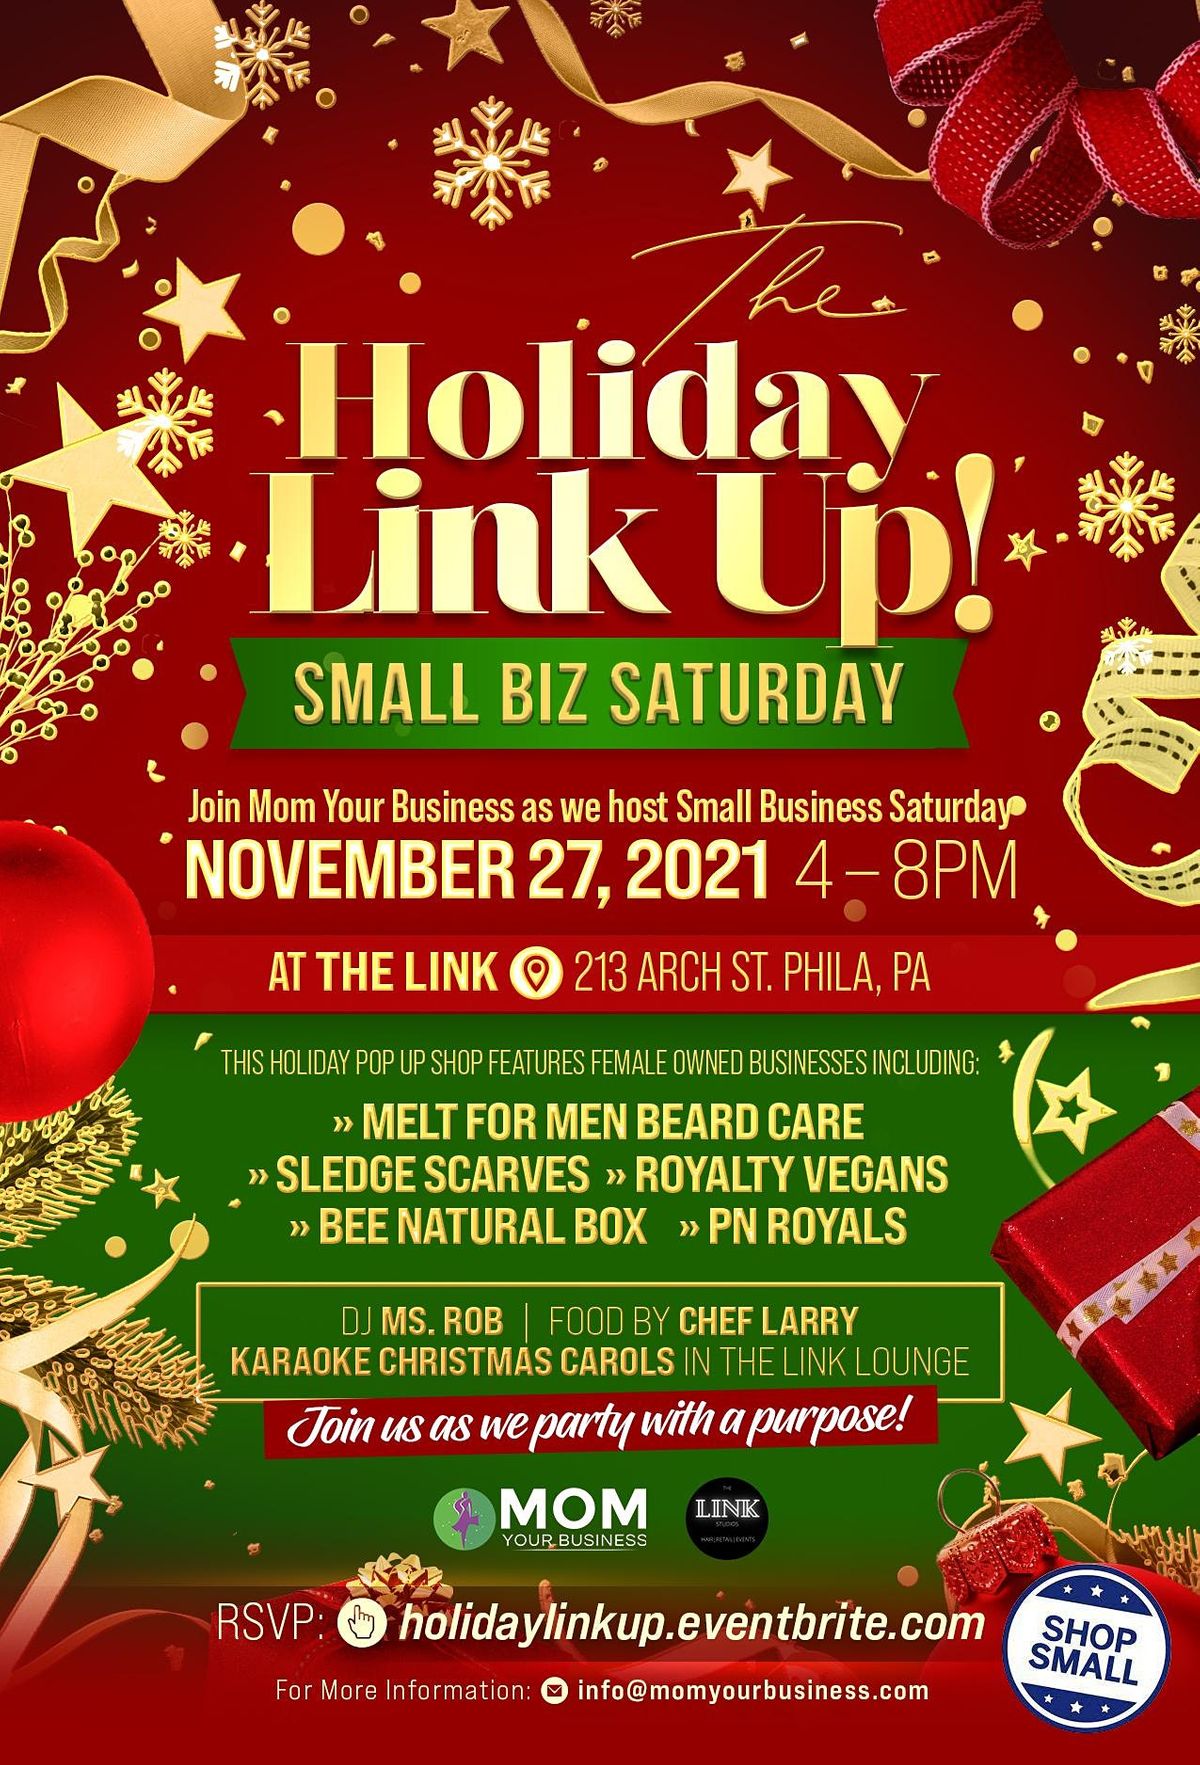 The Holiday Link Up!  Small Biz Saturday.